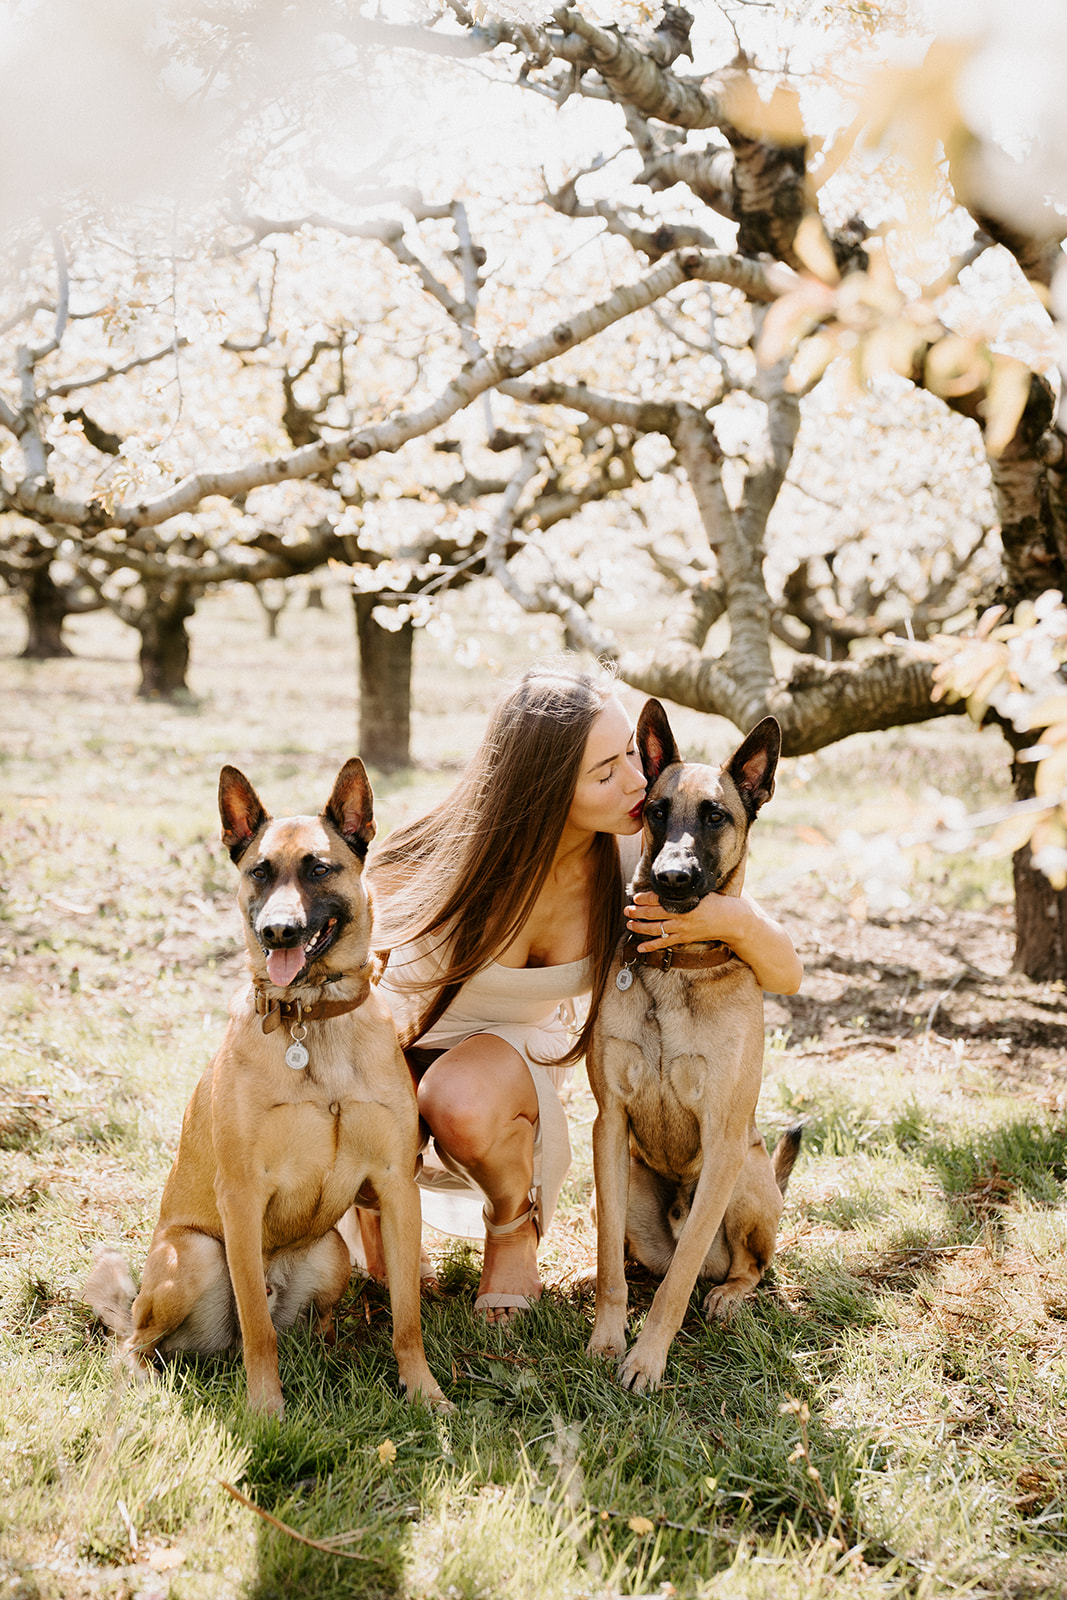 Woman with two dogs sitting.  Woman has arms wrapped around both dogs while kissing one of them.